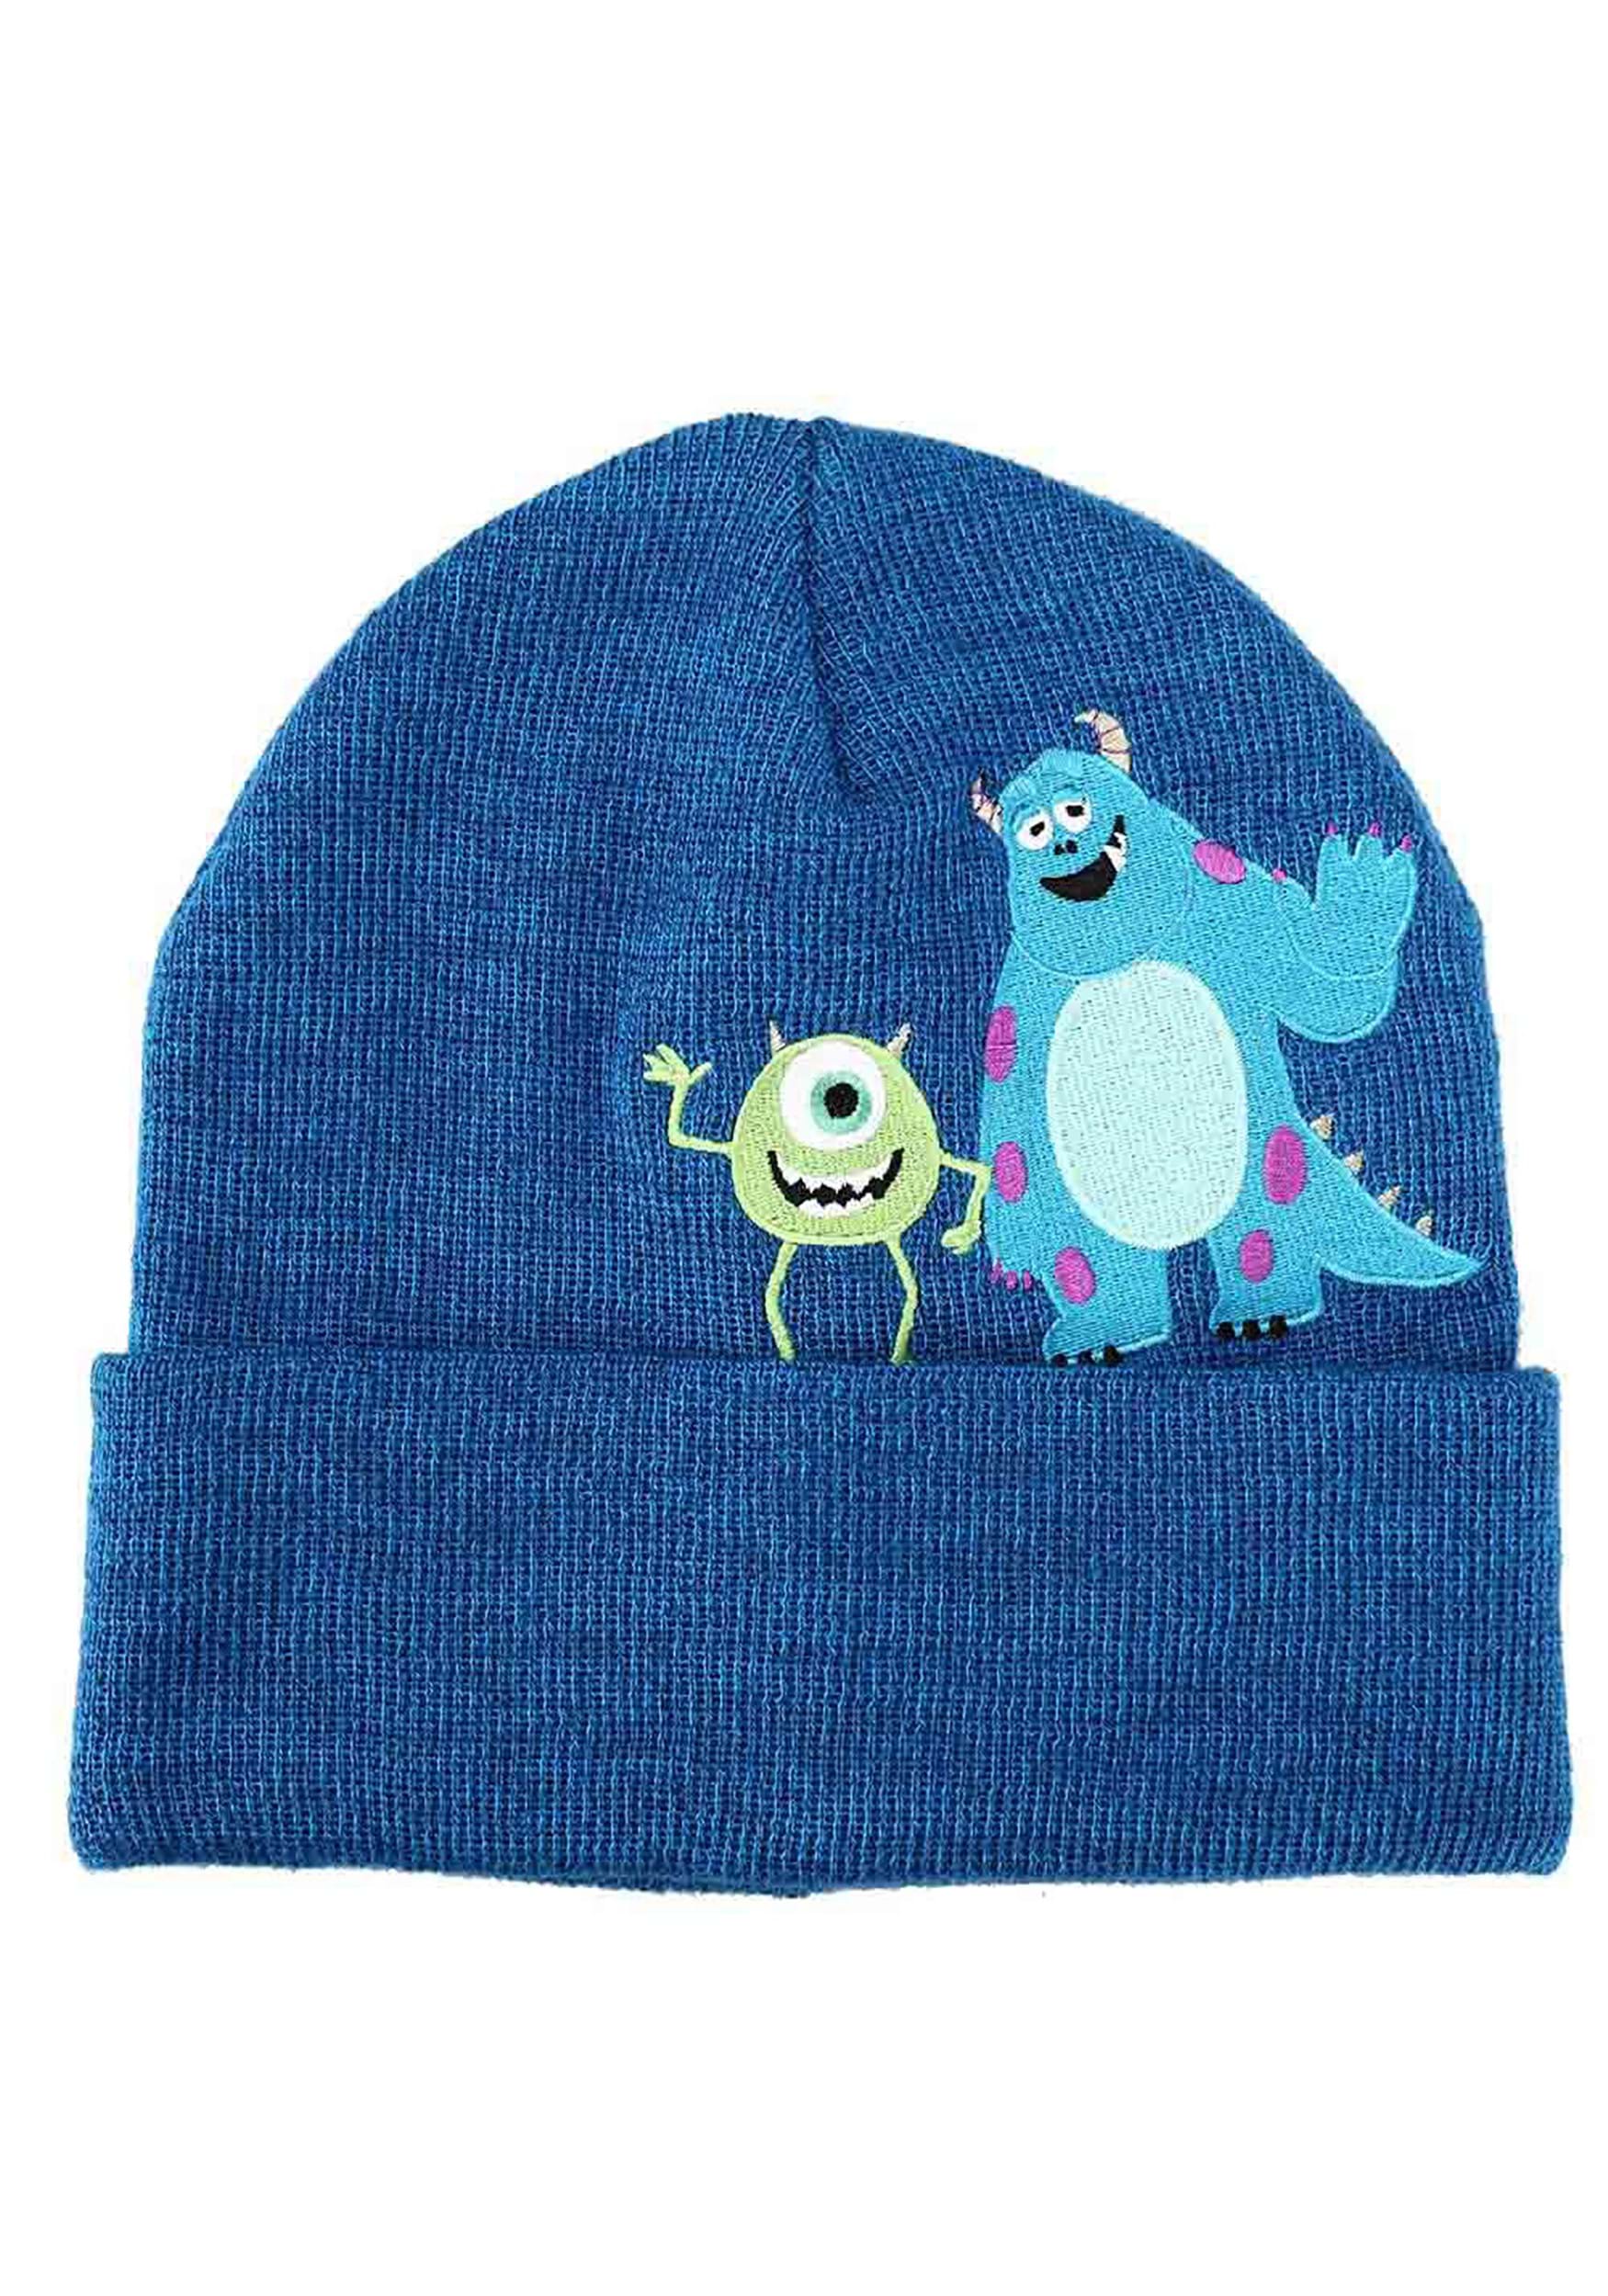 Disney Pixar Monster's Inc. Mike And Sulley Peek-a-Boo Beanie